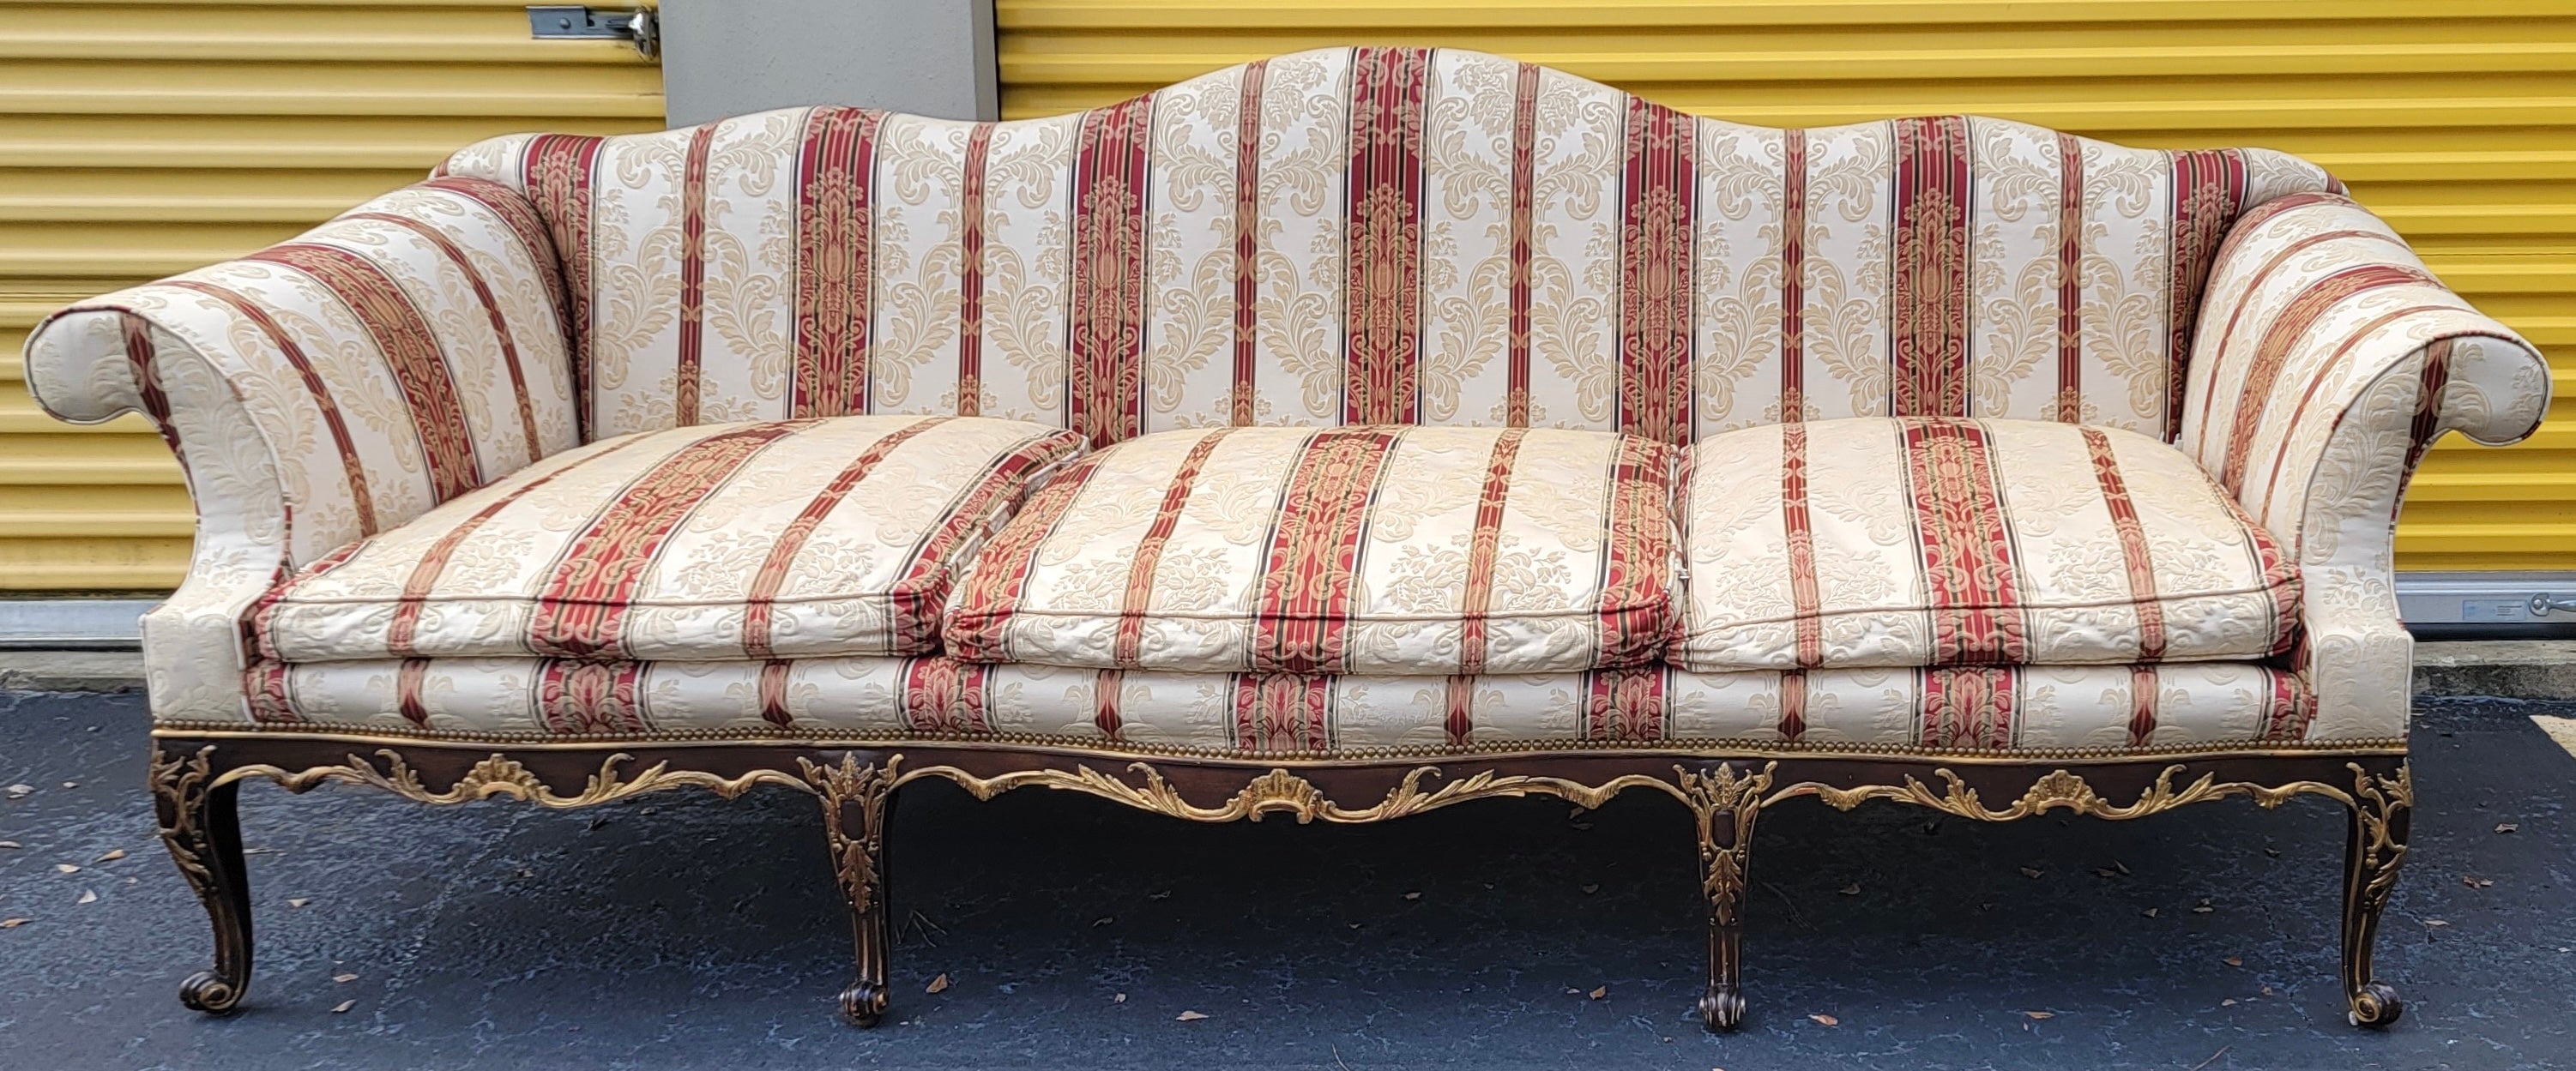 Late 20th-C. French Louis XVI Style Sofa By EJ Victor In Stripe Damask In Good Condition For Sale In Kennesaw, GA